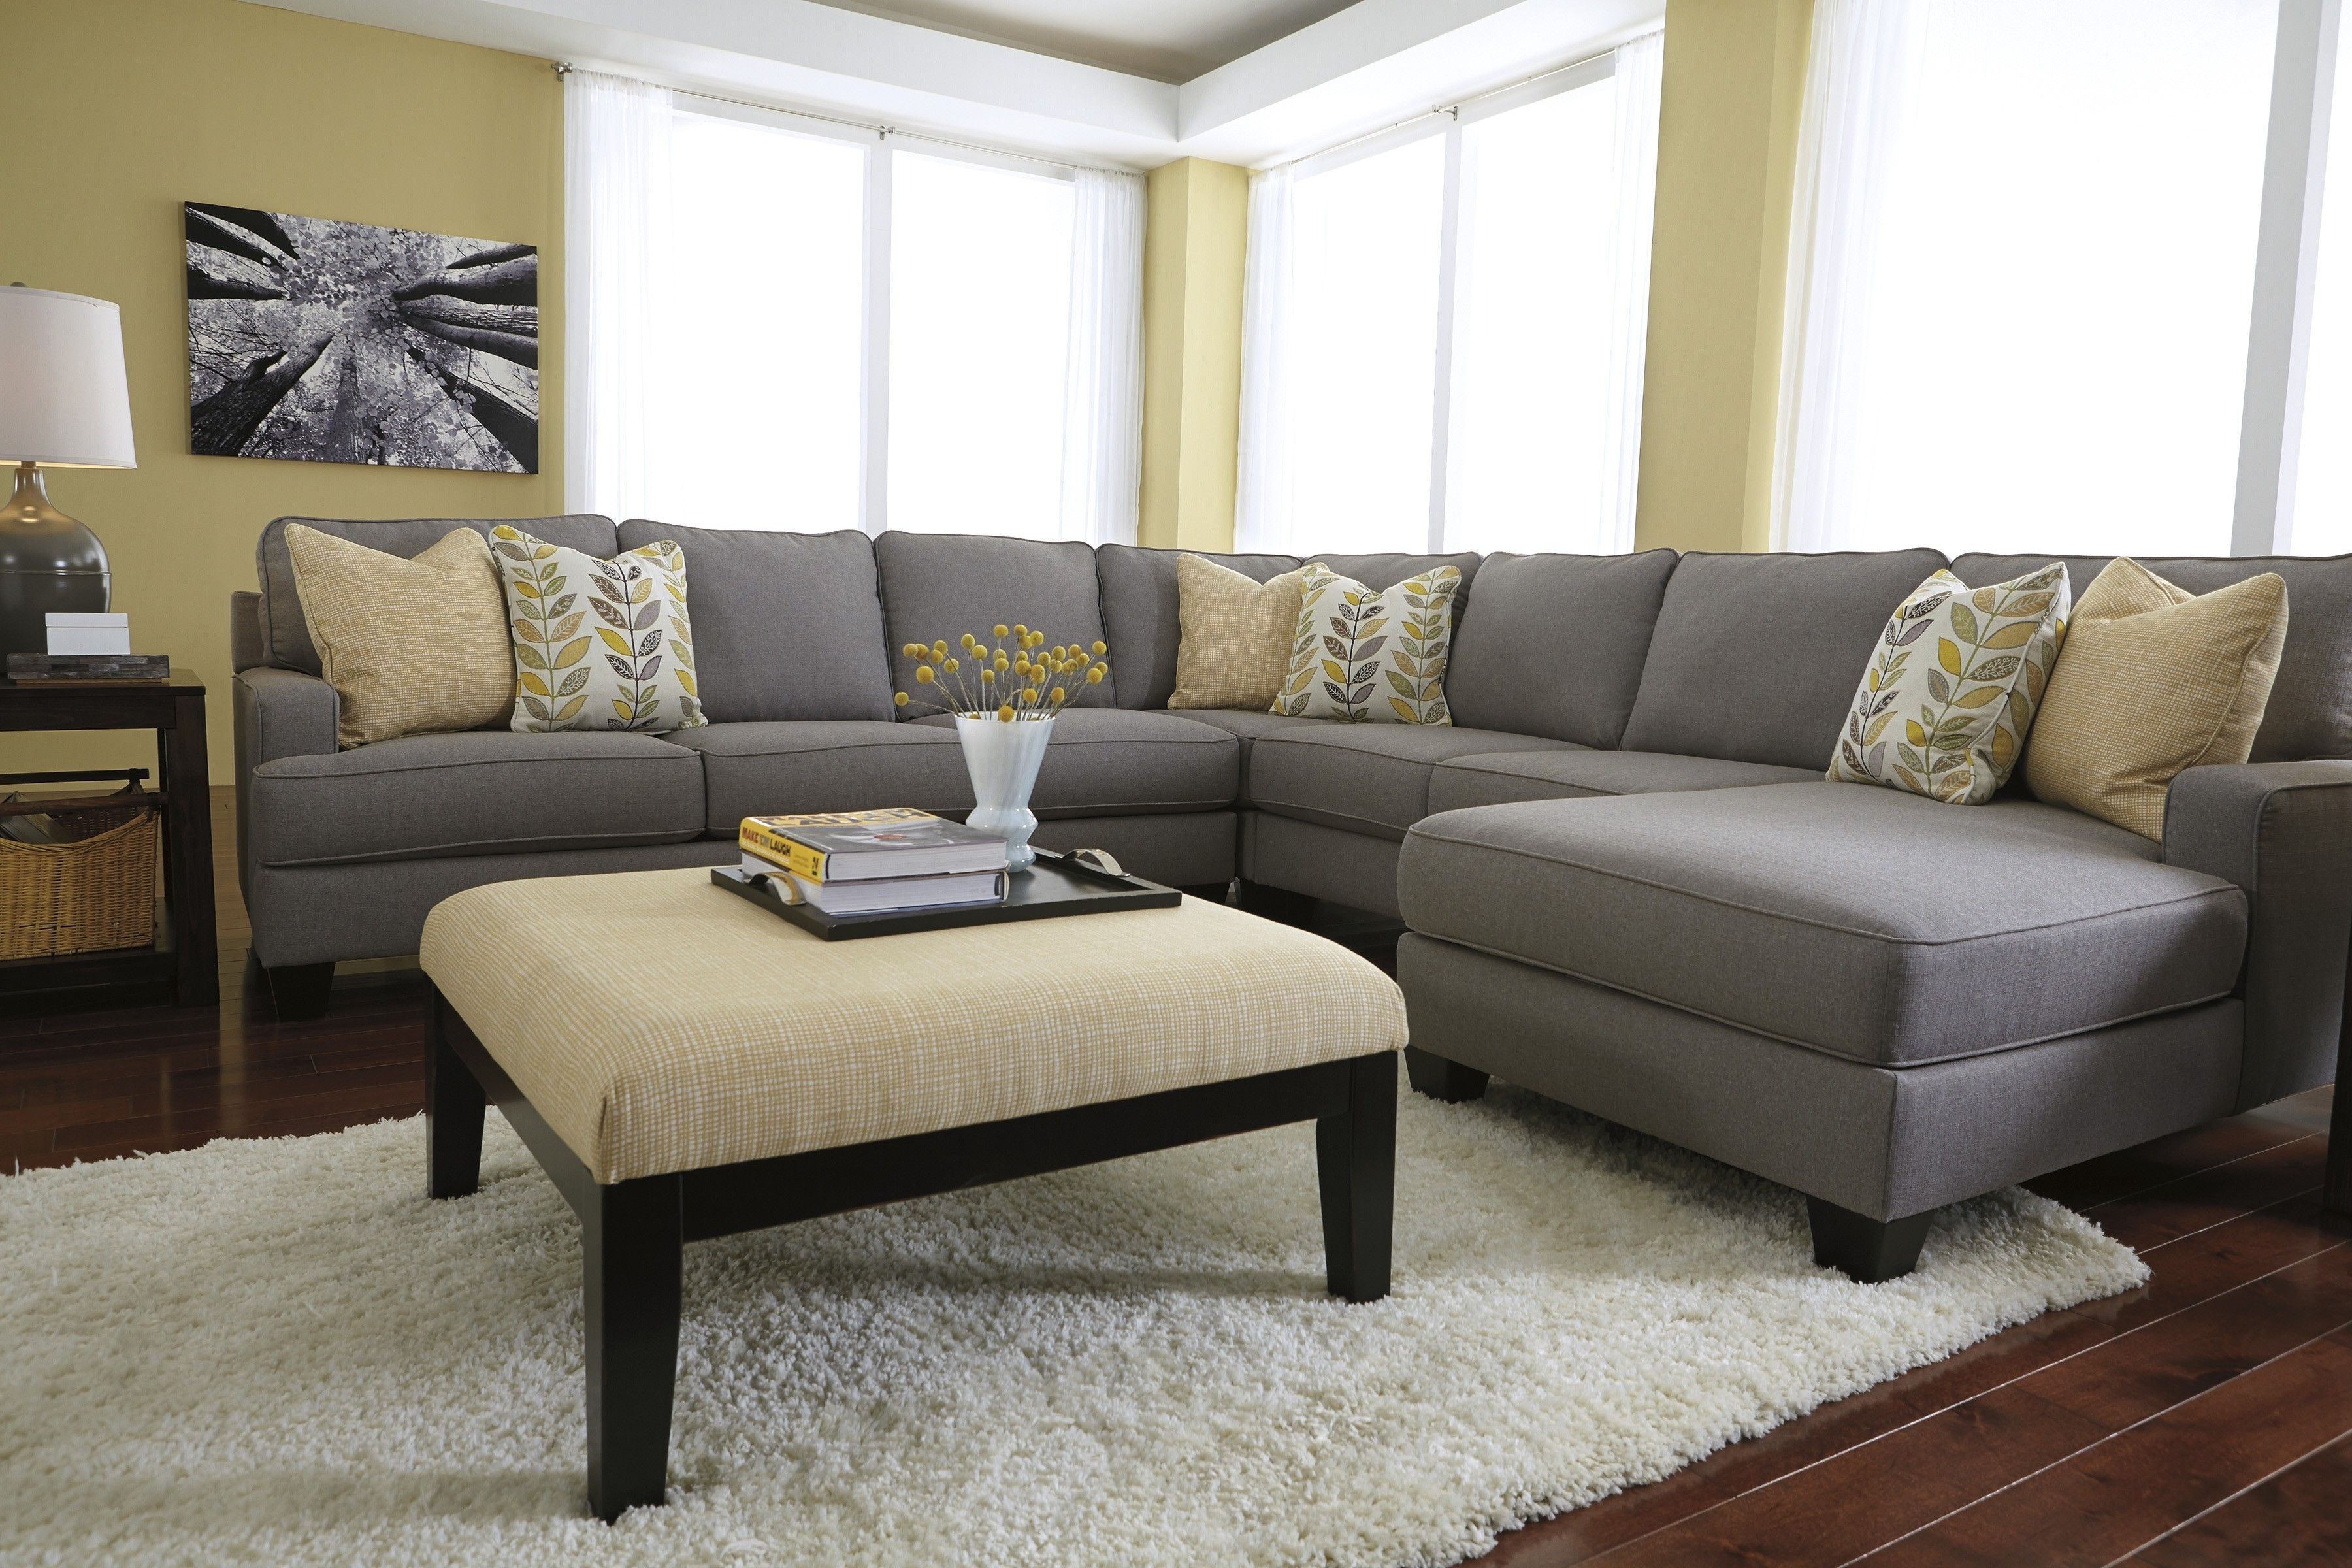 Amazing Sectional Sofa With Oversized Ottoman 59 For Your Best Intended For Quality Sectional Sofa (View 12 of 12)